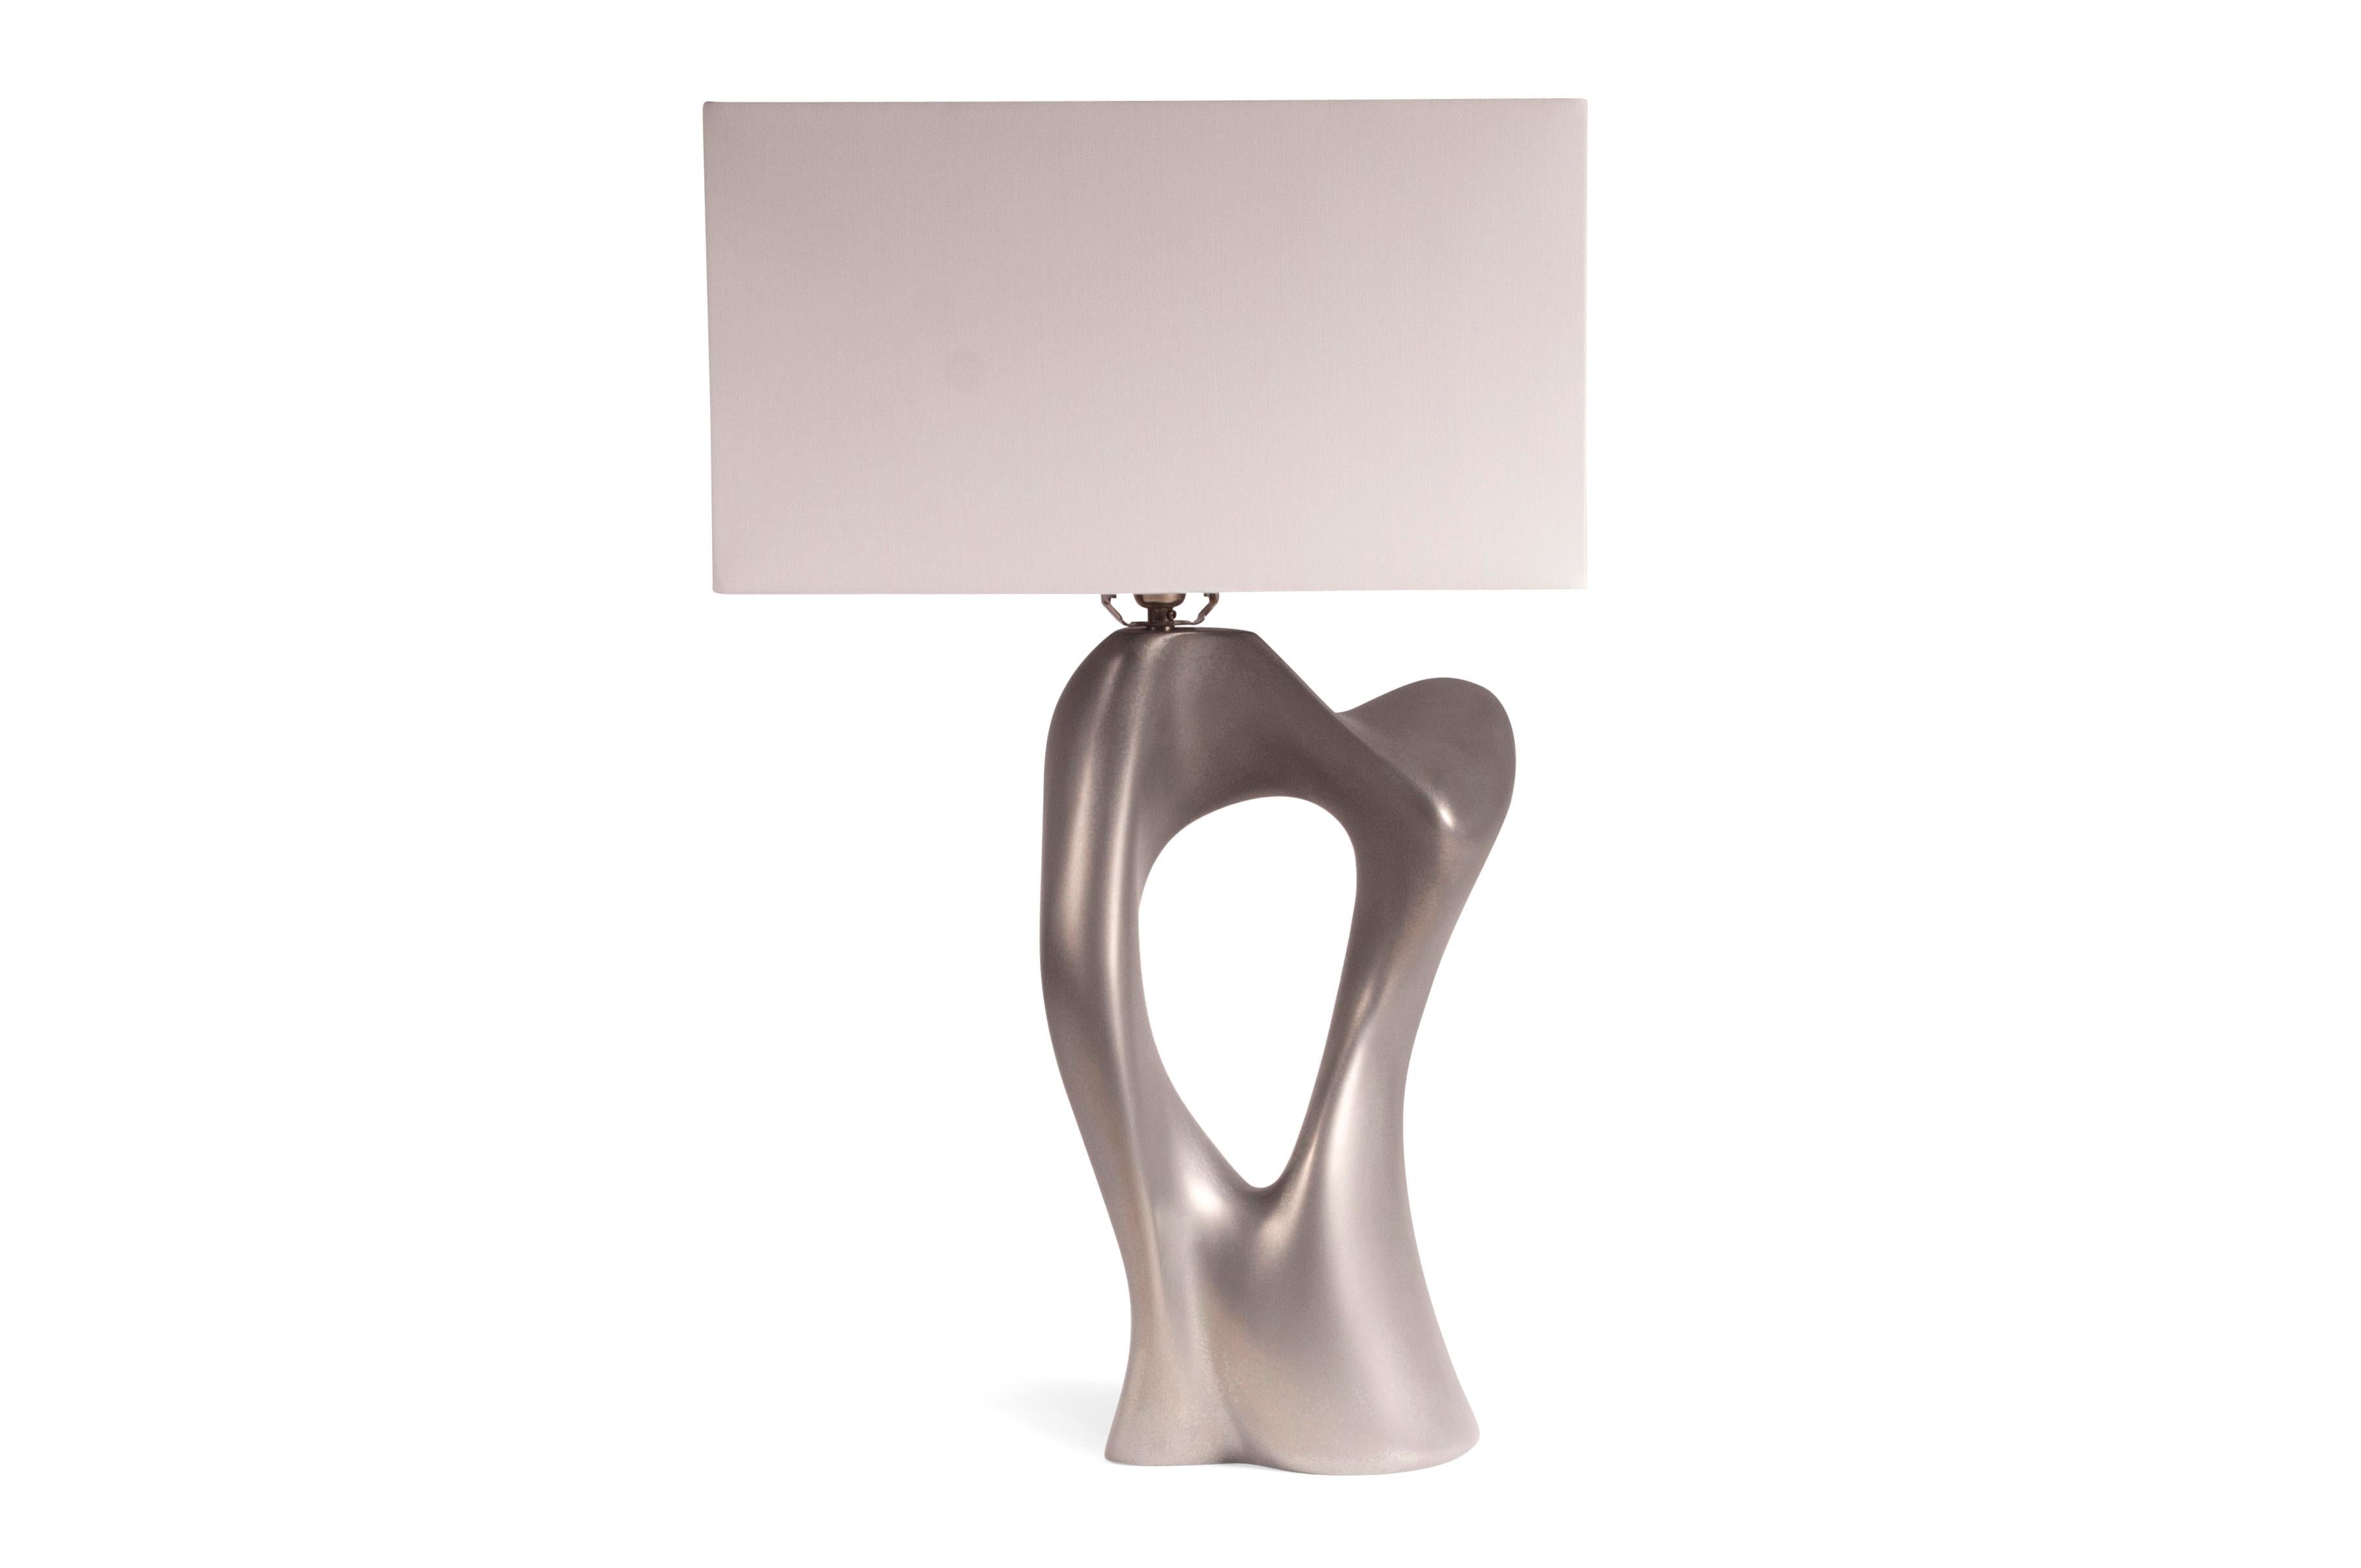 Vesta table lamp, stainless steel finish. Base dimensions: 11